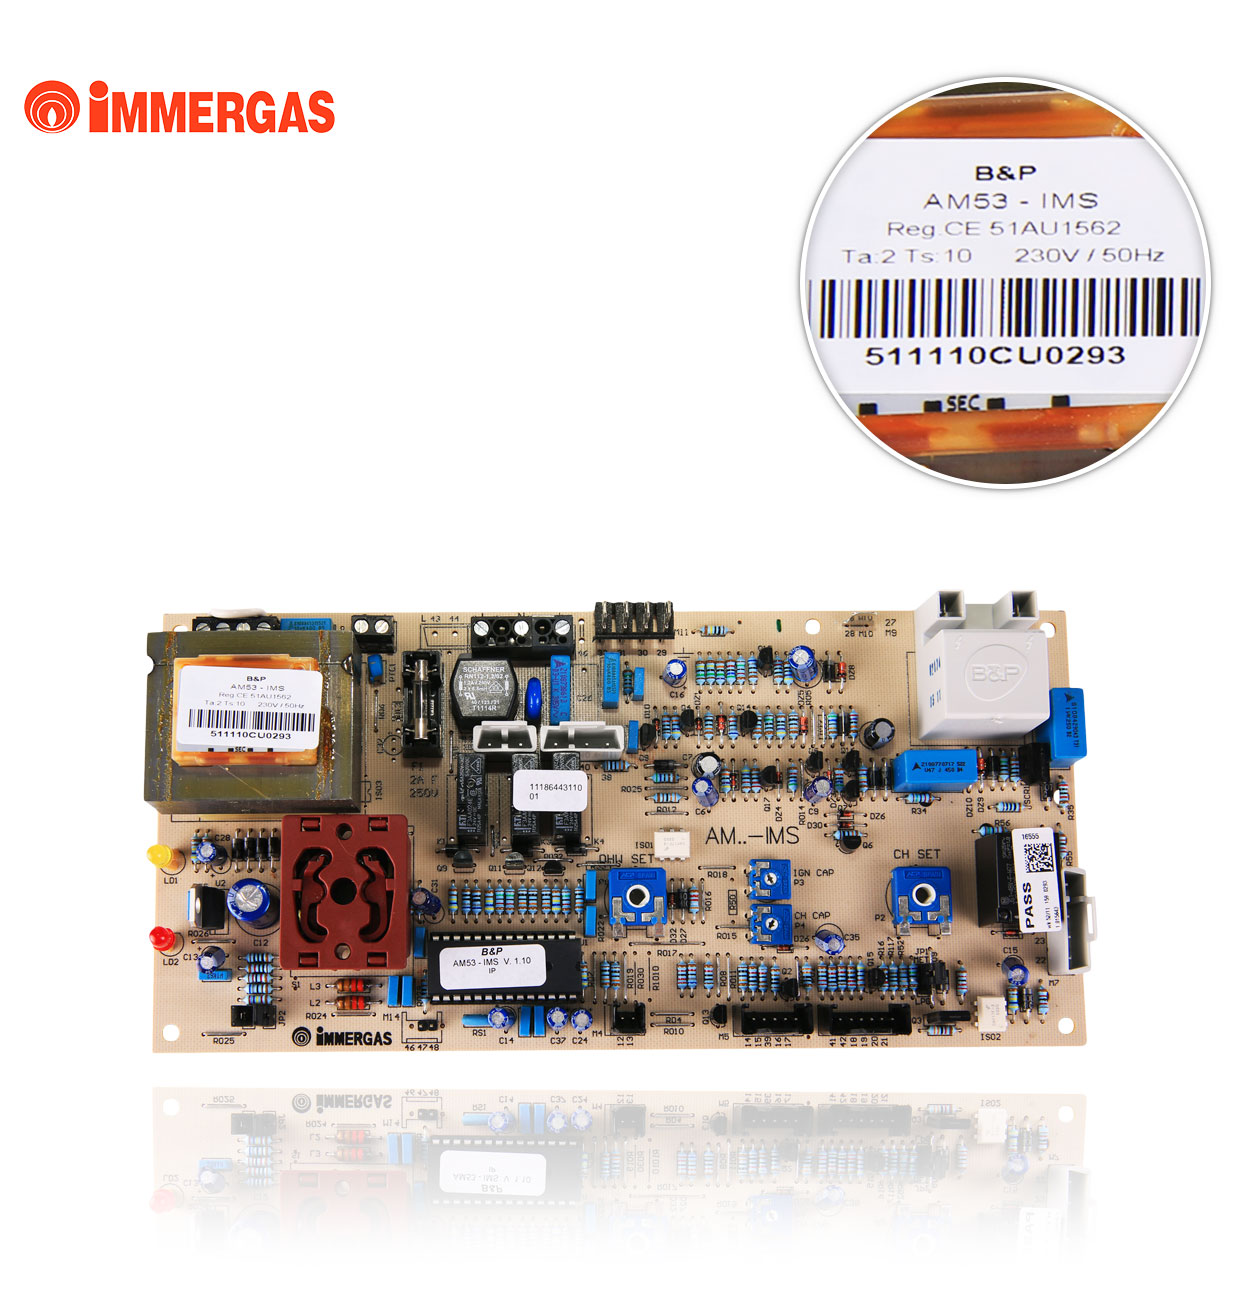 1015643  IMMERGAS NIKE/ EOLO STAR IGNITION AND ELECTRONIC REGULATOR BOARD